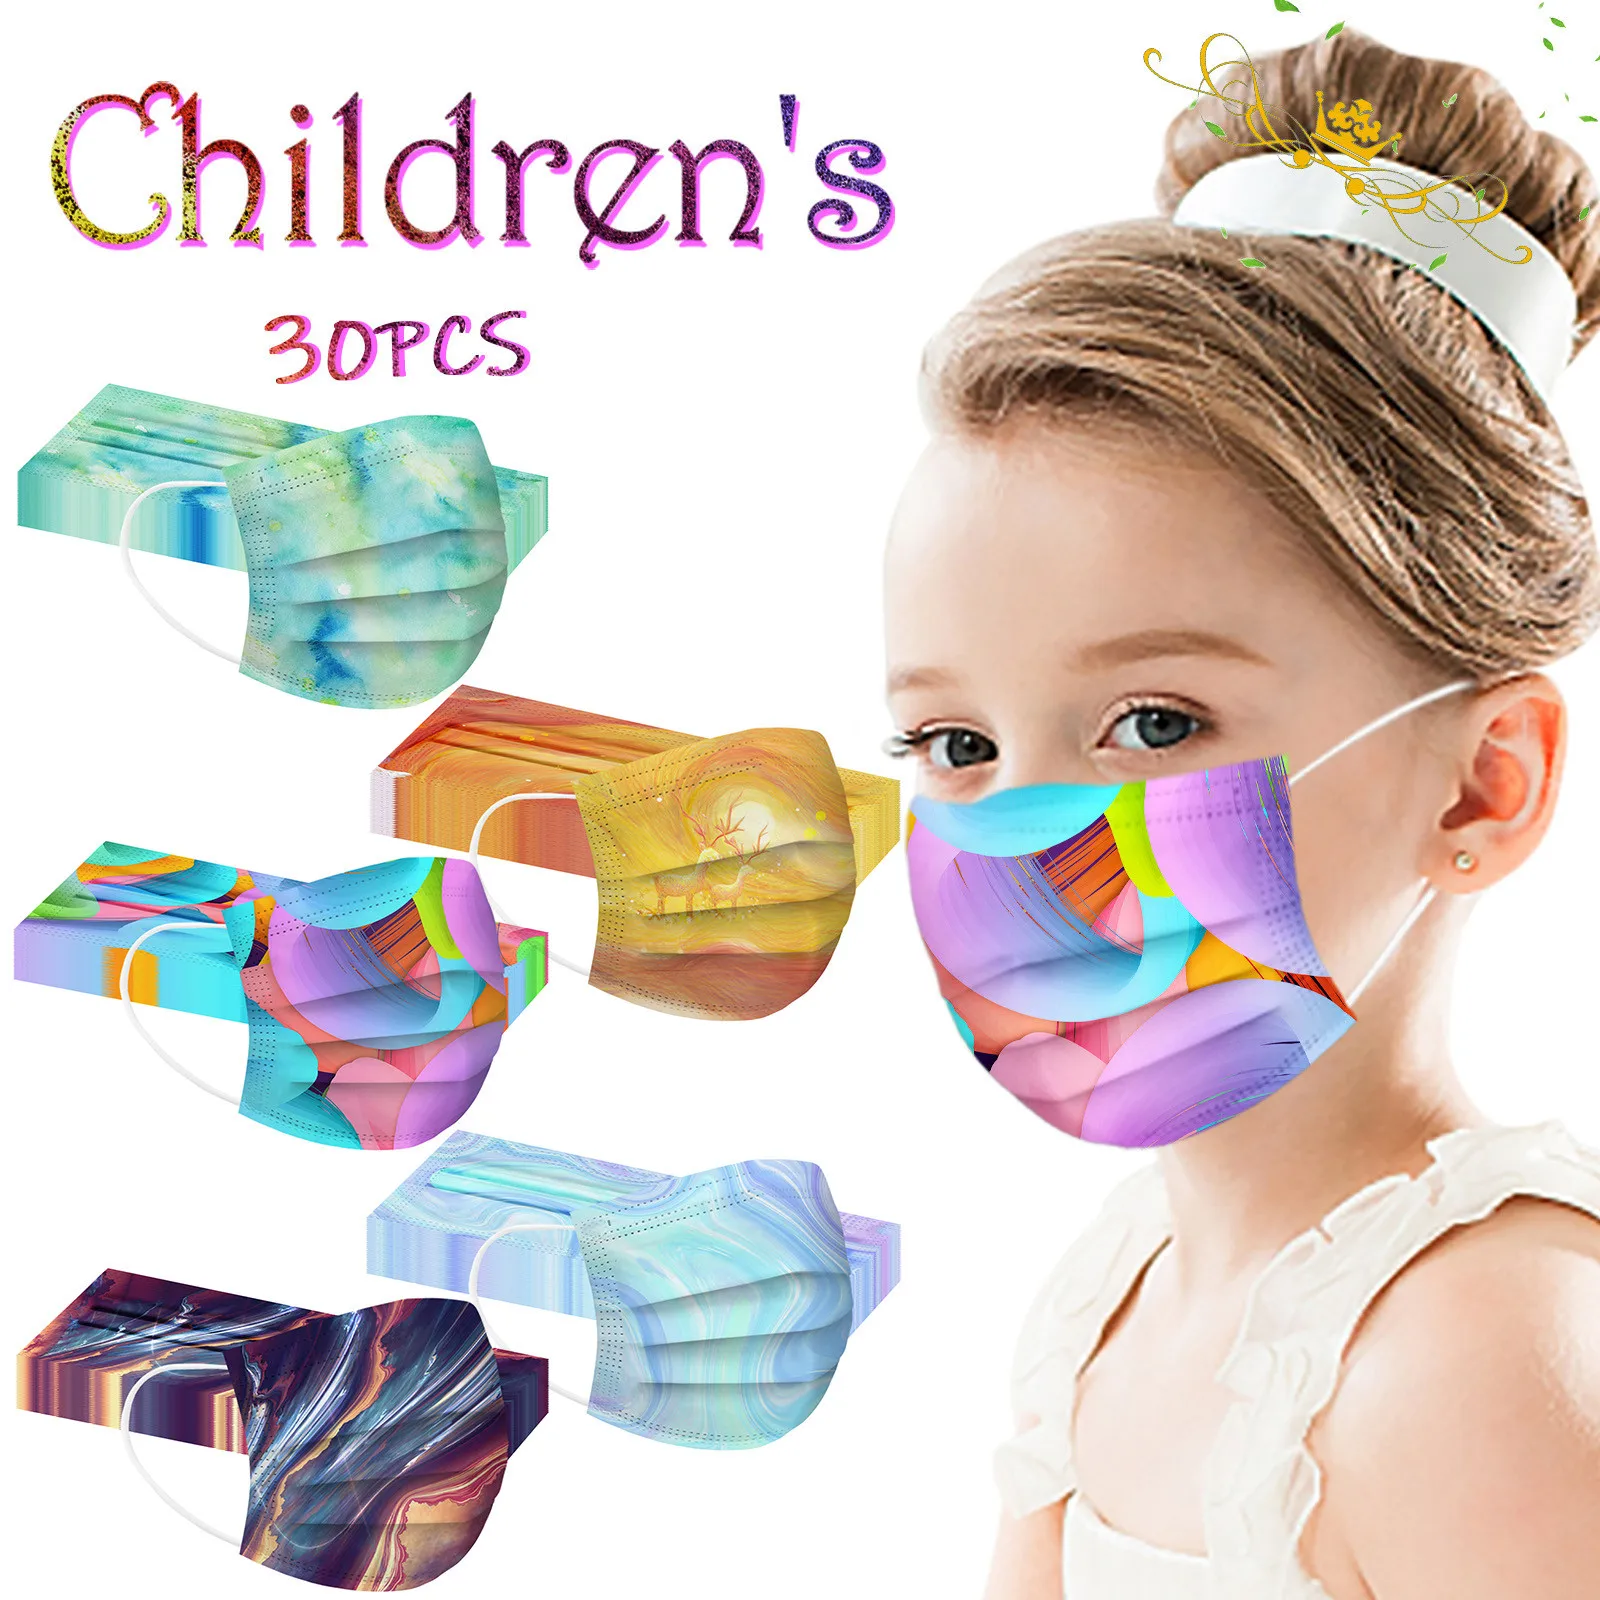 

30pcs Child Halloween Mask Disposable 3 Ply Ear Loop Girl Boy Face Mask Cosplay Protective Ultrathin Kid Mouth-muffle Mascarilla